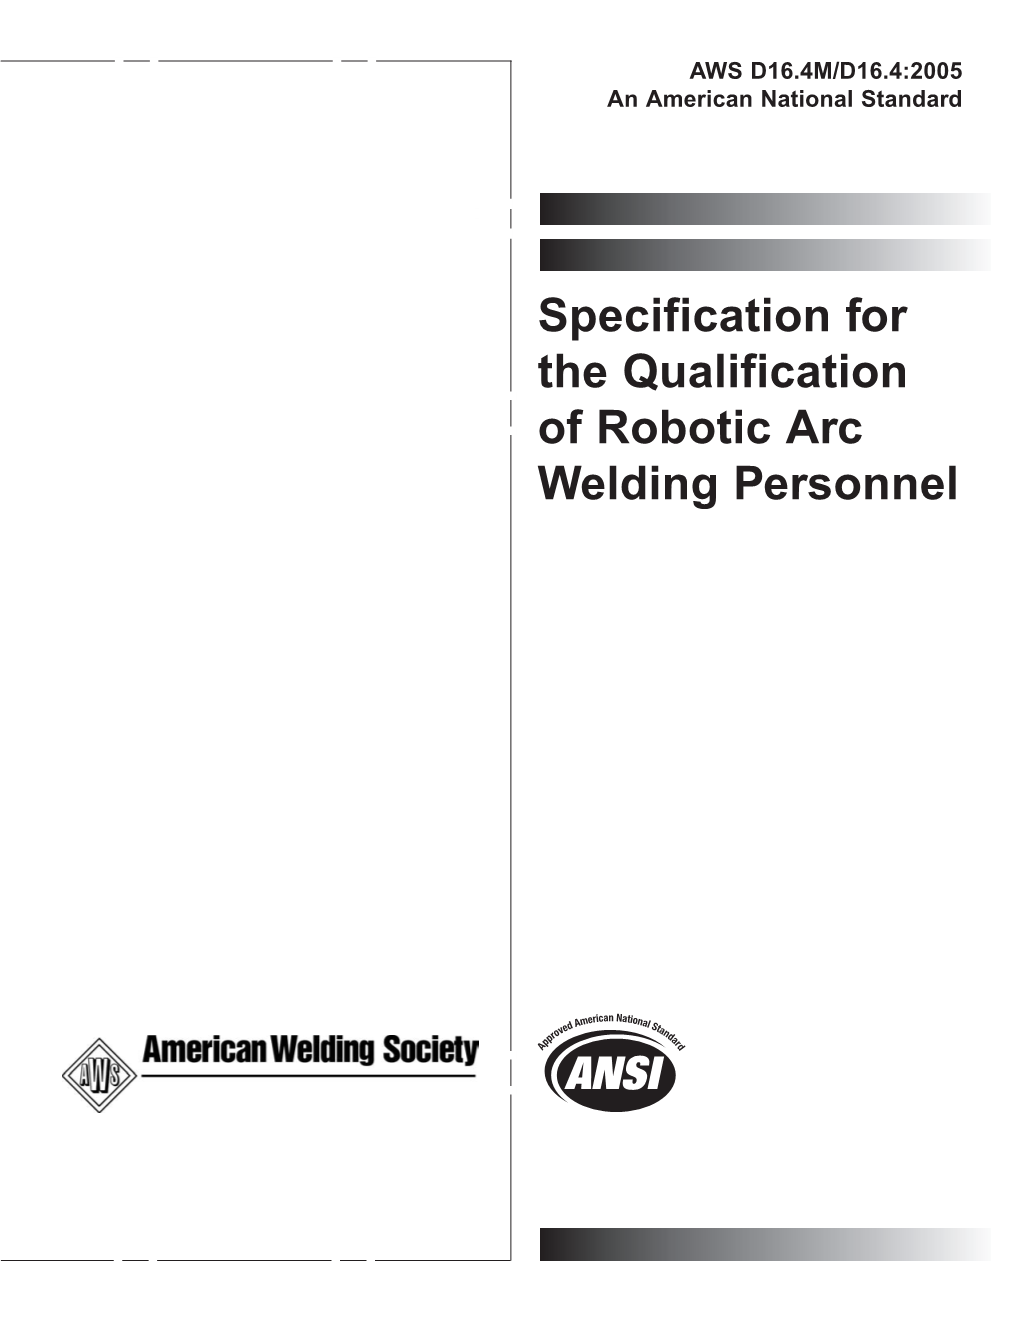 Specification for the Qualification of Robotic Arc Welding Personnel